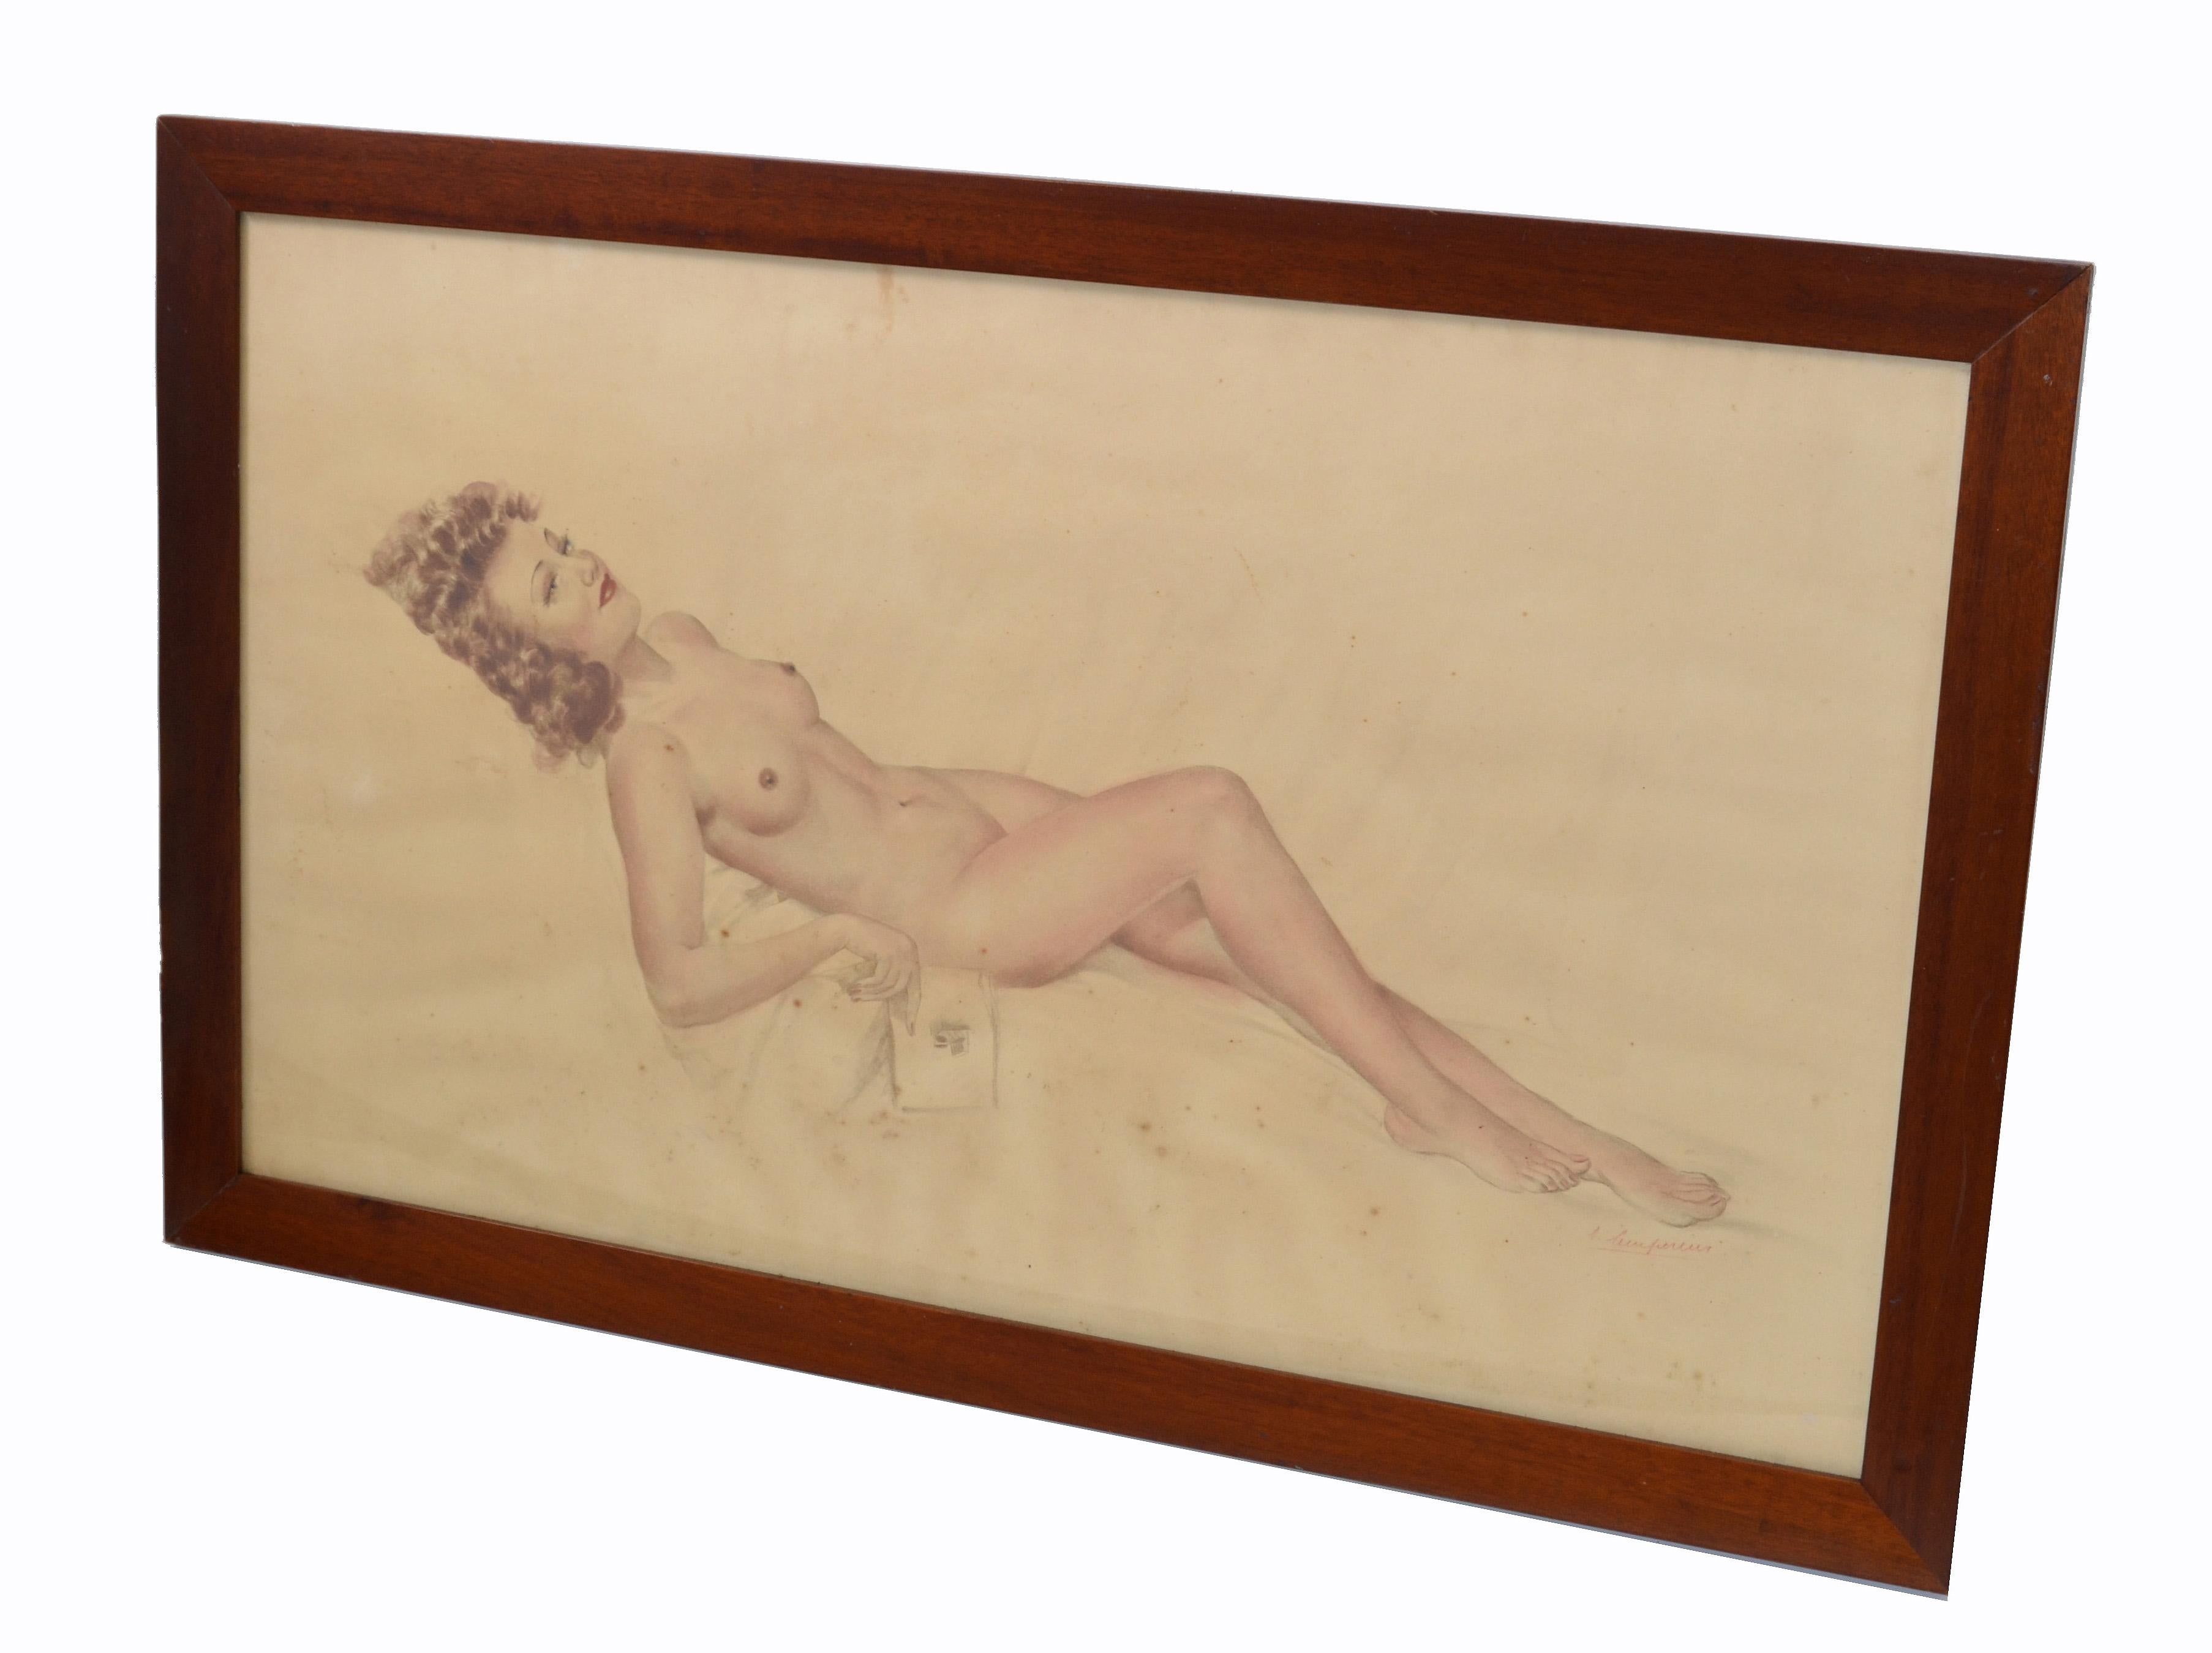 Signed French framed painting resting nude woman from the 1940.
Traditionally those paintings were hung above the bed in a master bedroom in France.
Original signature by Artist.
Size of painting: 37.5 x 22 inches.